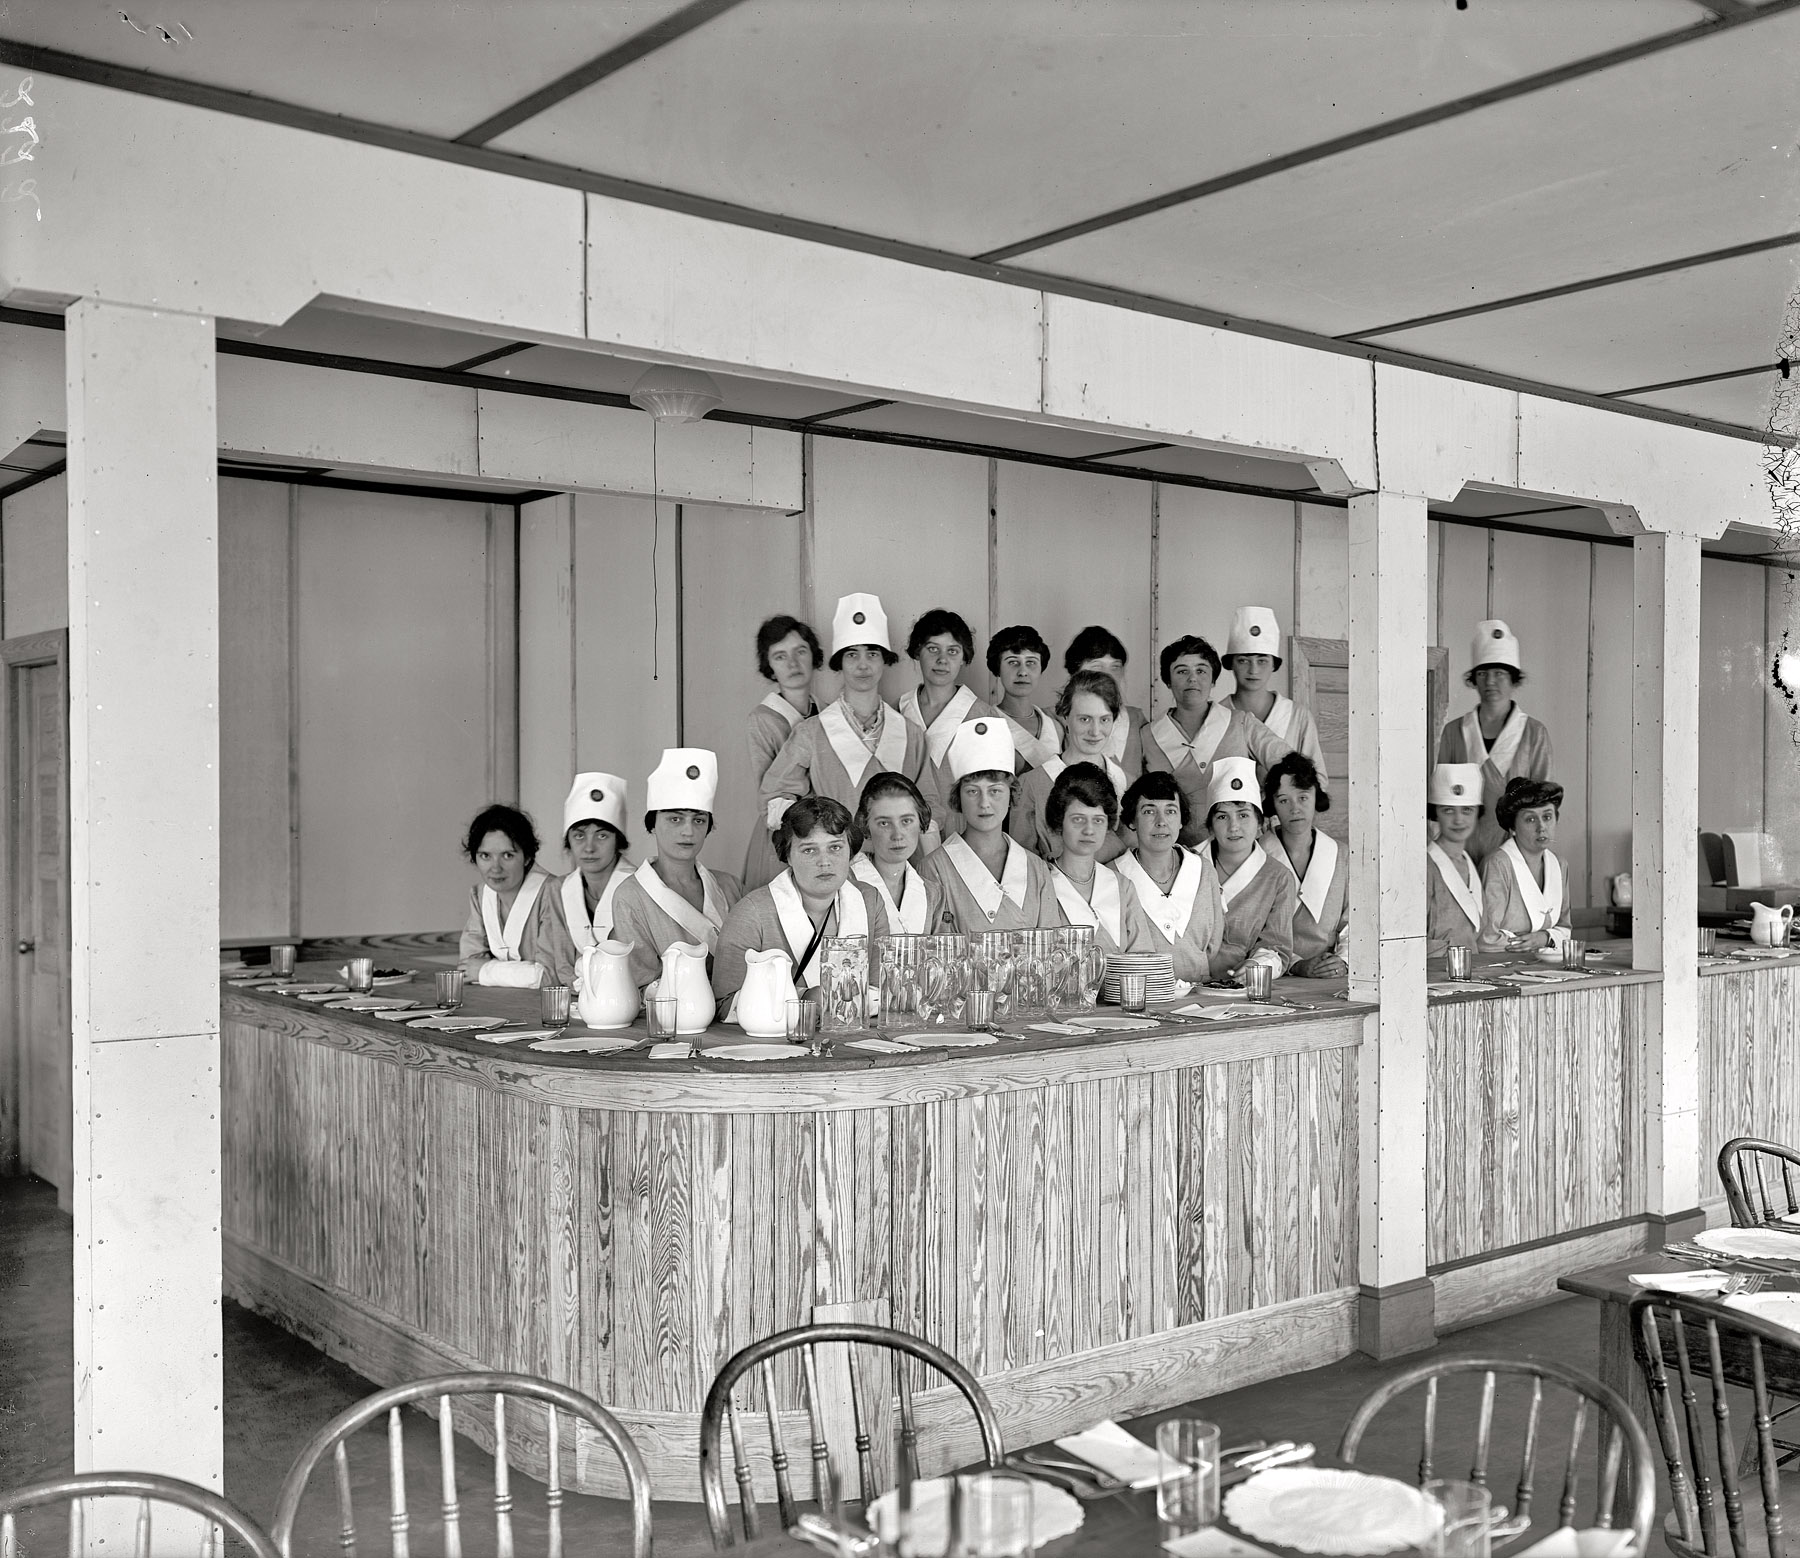 Washington circa 1918. "U.S. Food Administration." Dining room in the new Food Administration headquarters. Harris & Ewing glass negative. View full size.